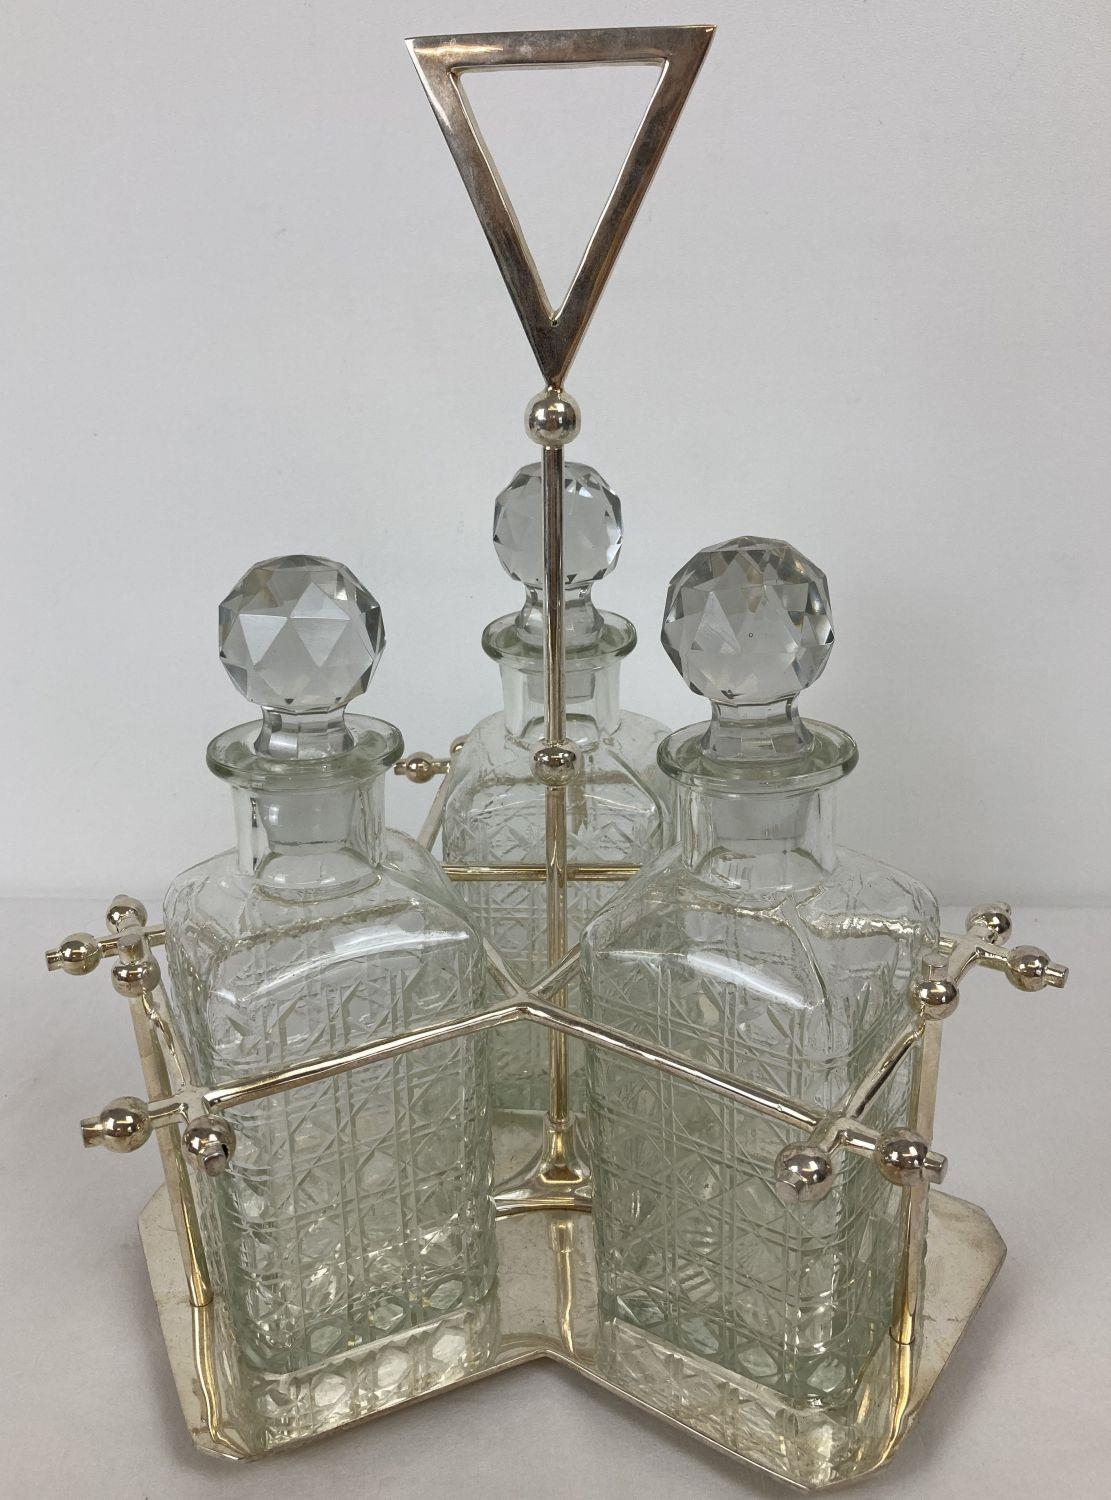 A silver plated triple decanter stand tantalus with 3 cut glass decanters. Central screw in stem